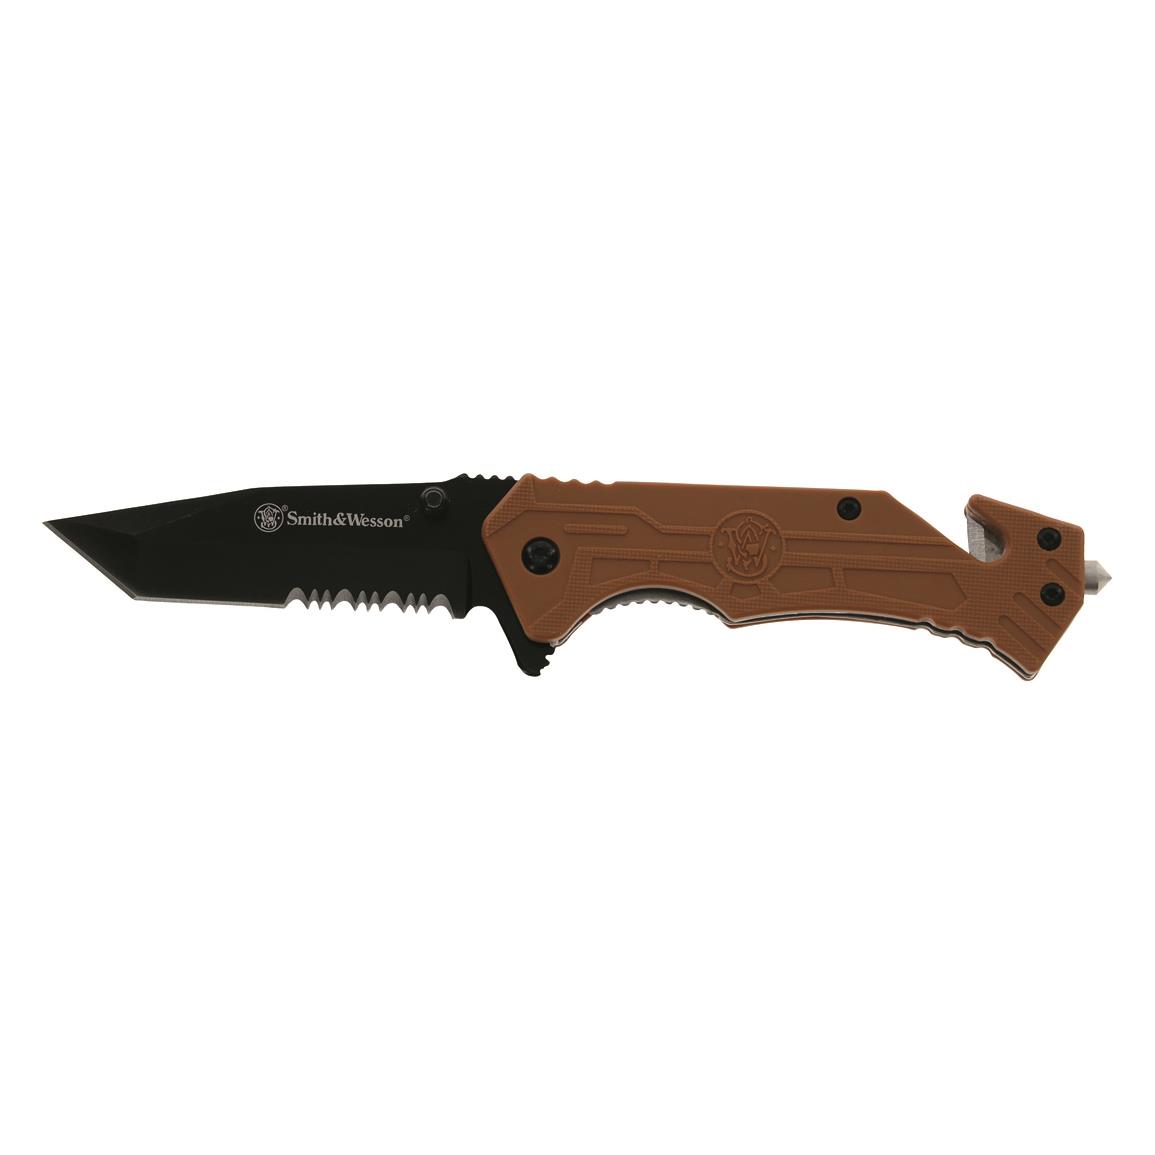 3.25" partially-serrated tanto-point blade with black oxide finish